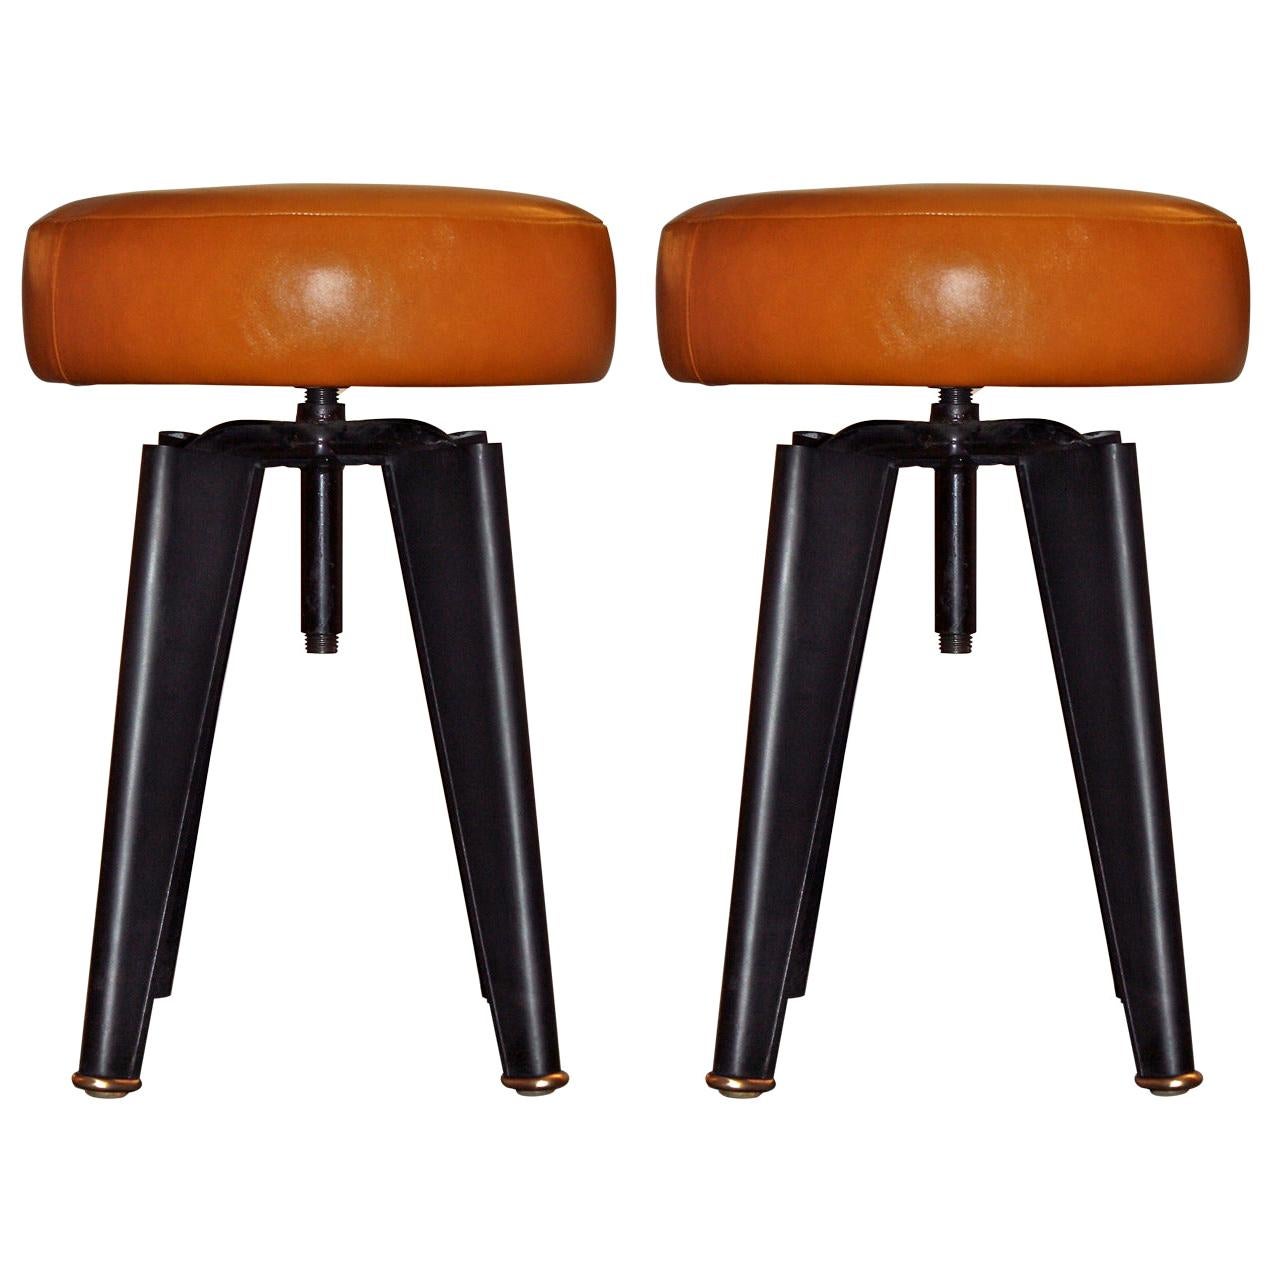 Pair of Piano Stools by Dominique for the Clemenceau Aircraft Carrier